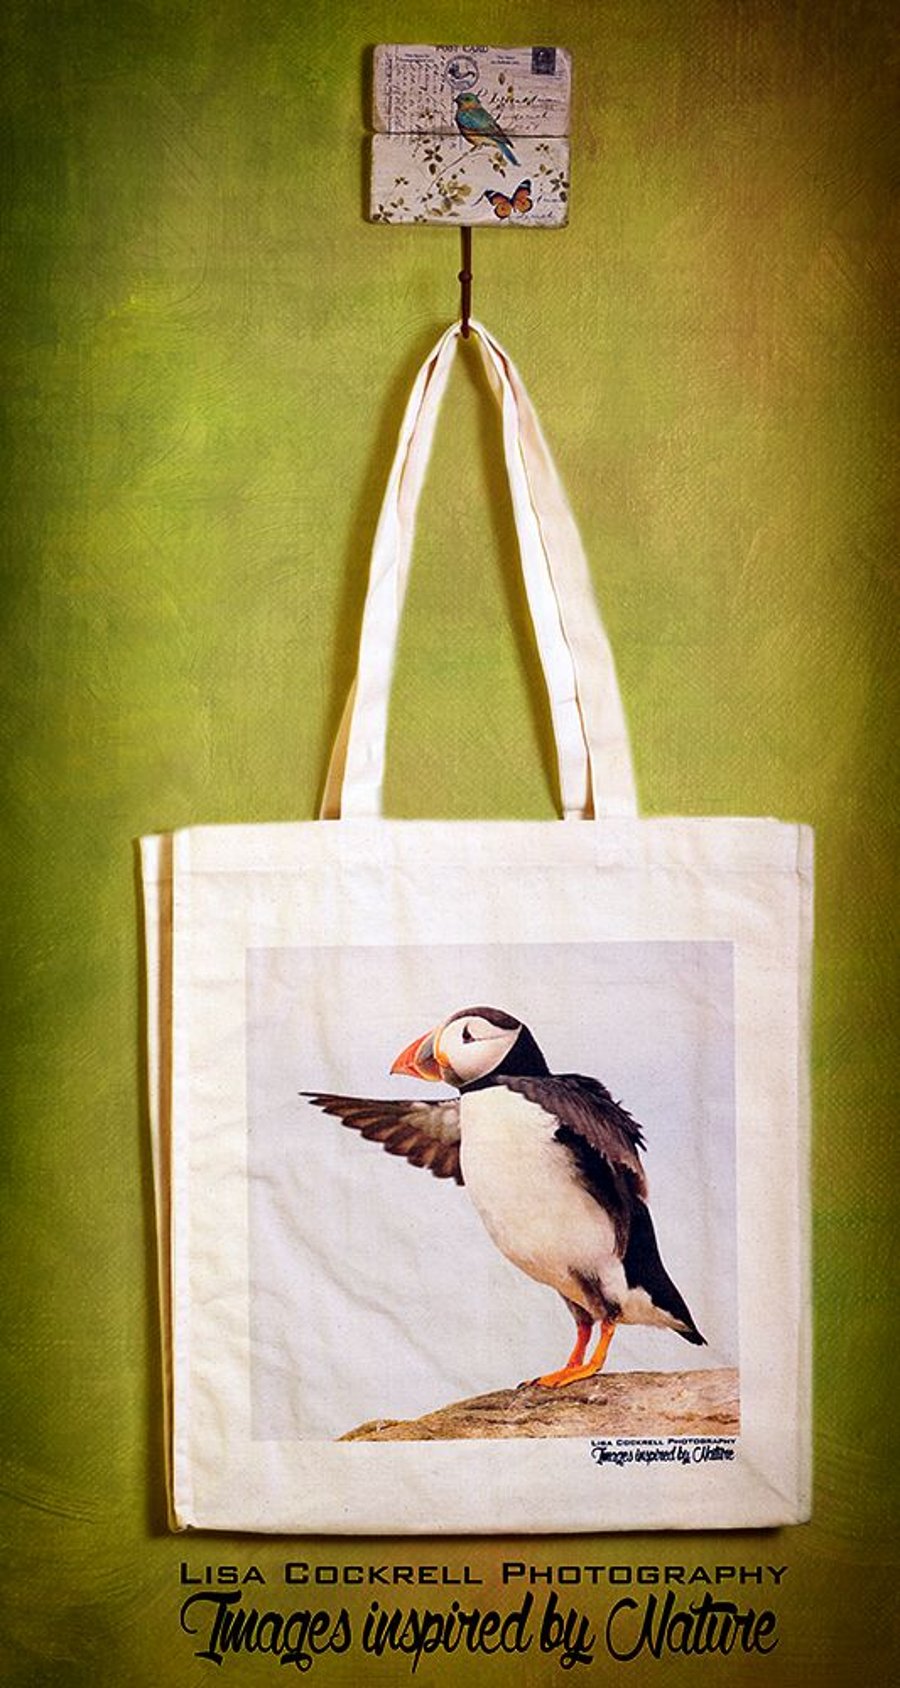 PUFFIN ROCK - TOTE BAGS INSPIRED BY NATURE FROM LISA COCKRELL PHOTOGRAPHY